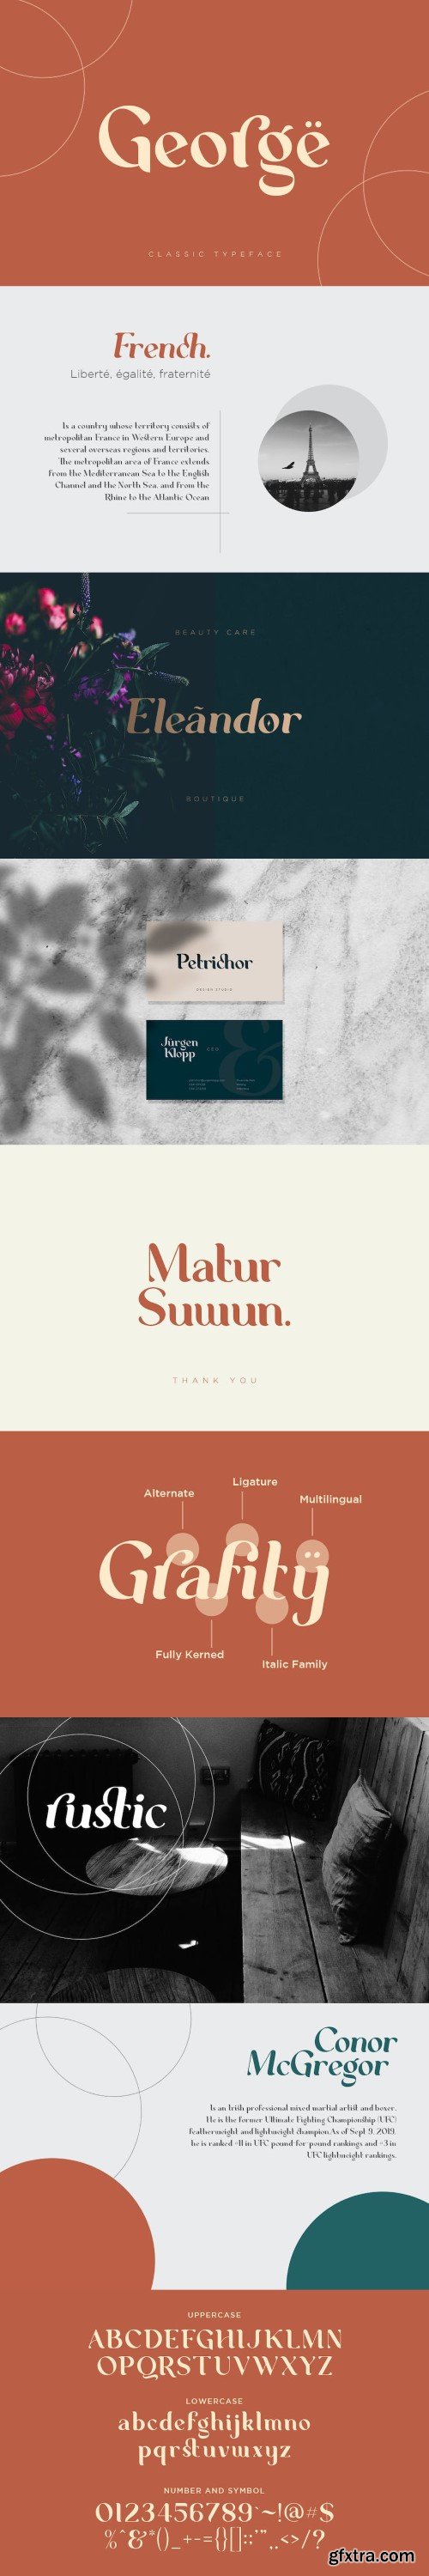 George is a classic serif typeface